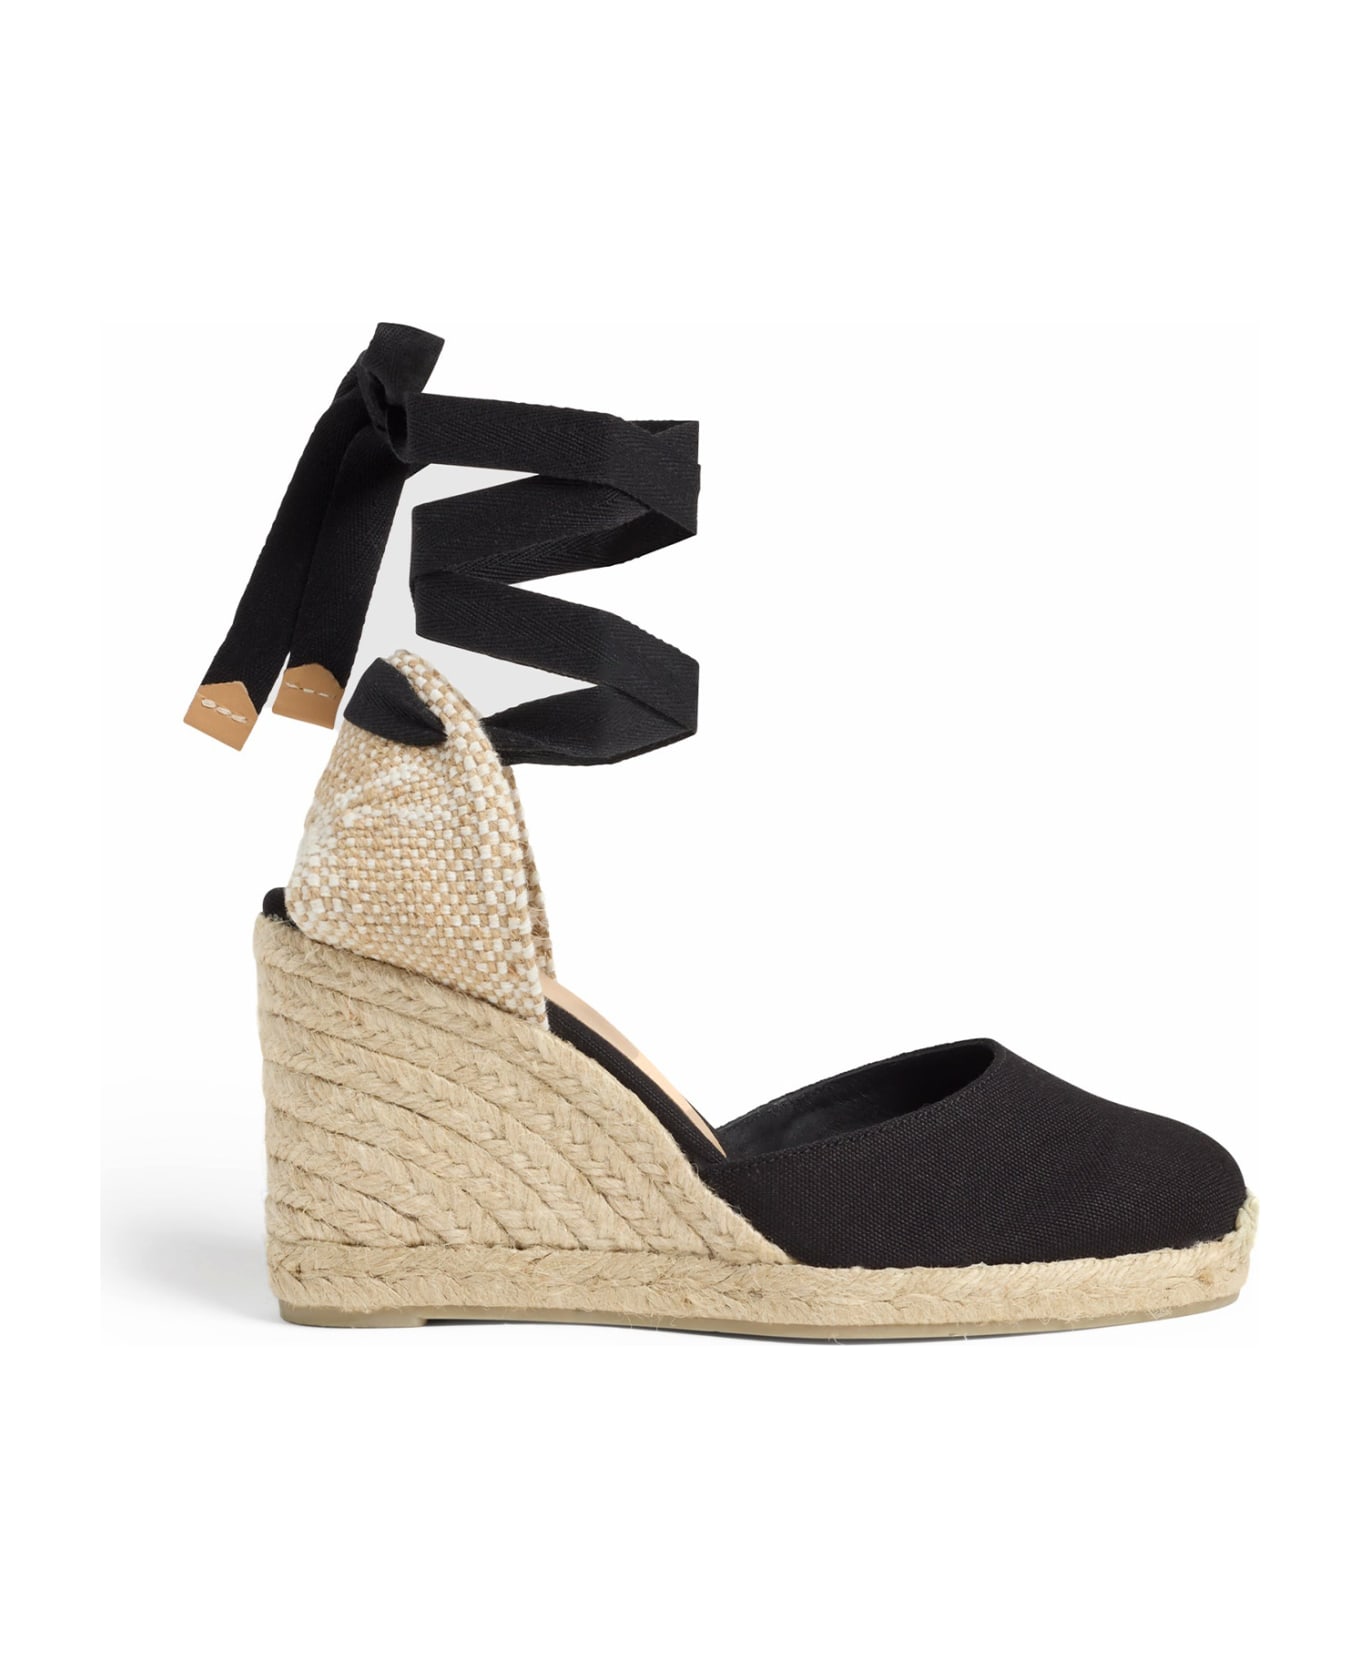 Castañer Espadrilles Carina Black With Laces At The Ankle - Negro ウェッジシューズ